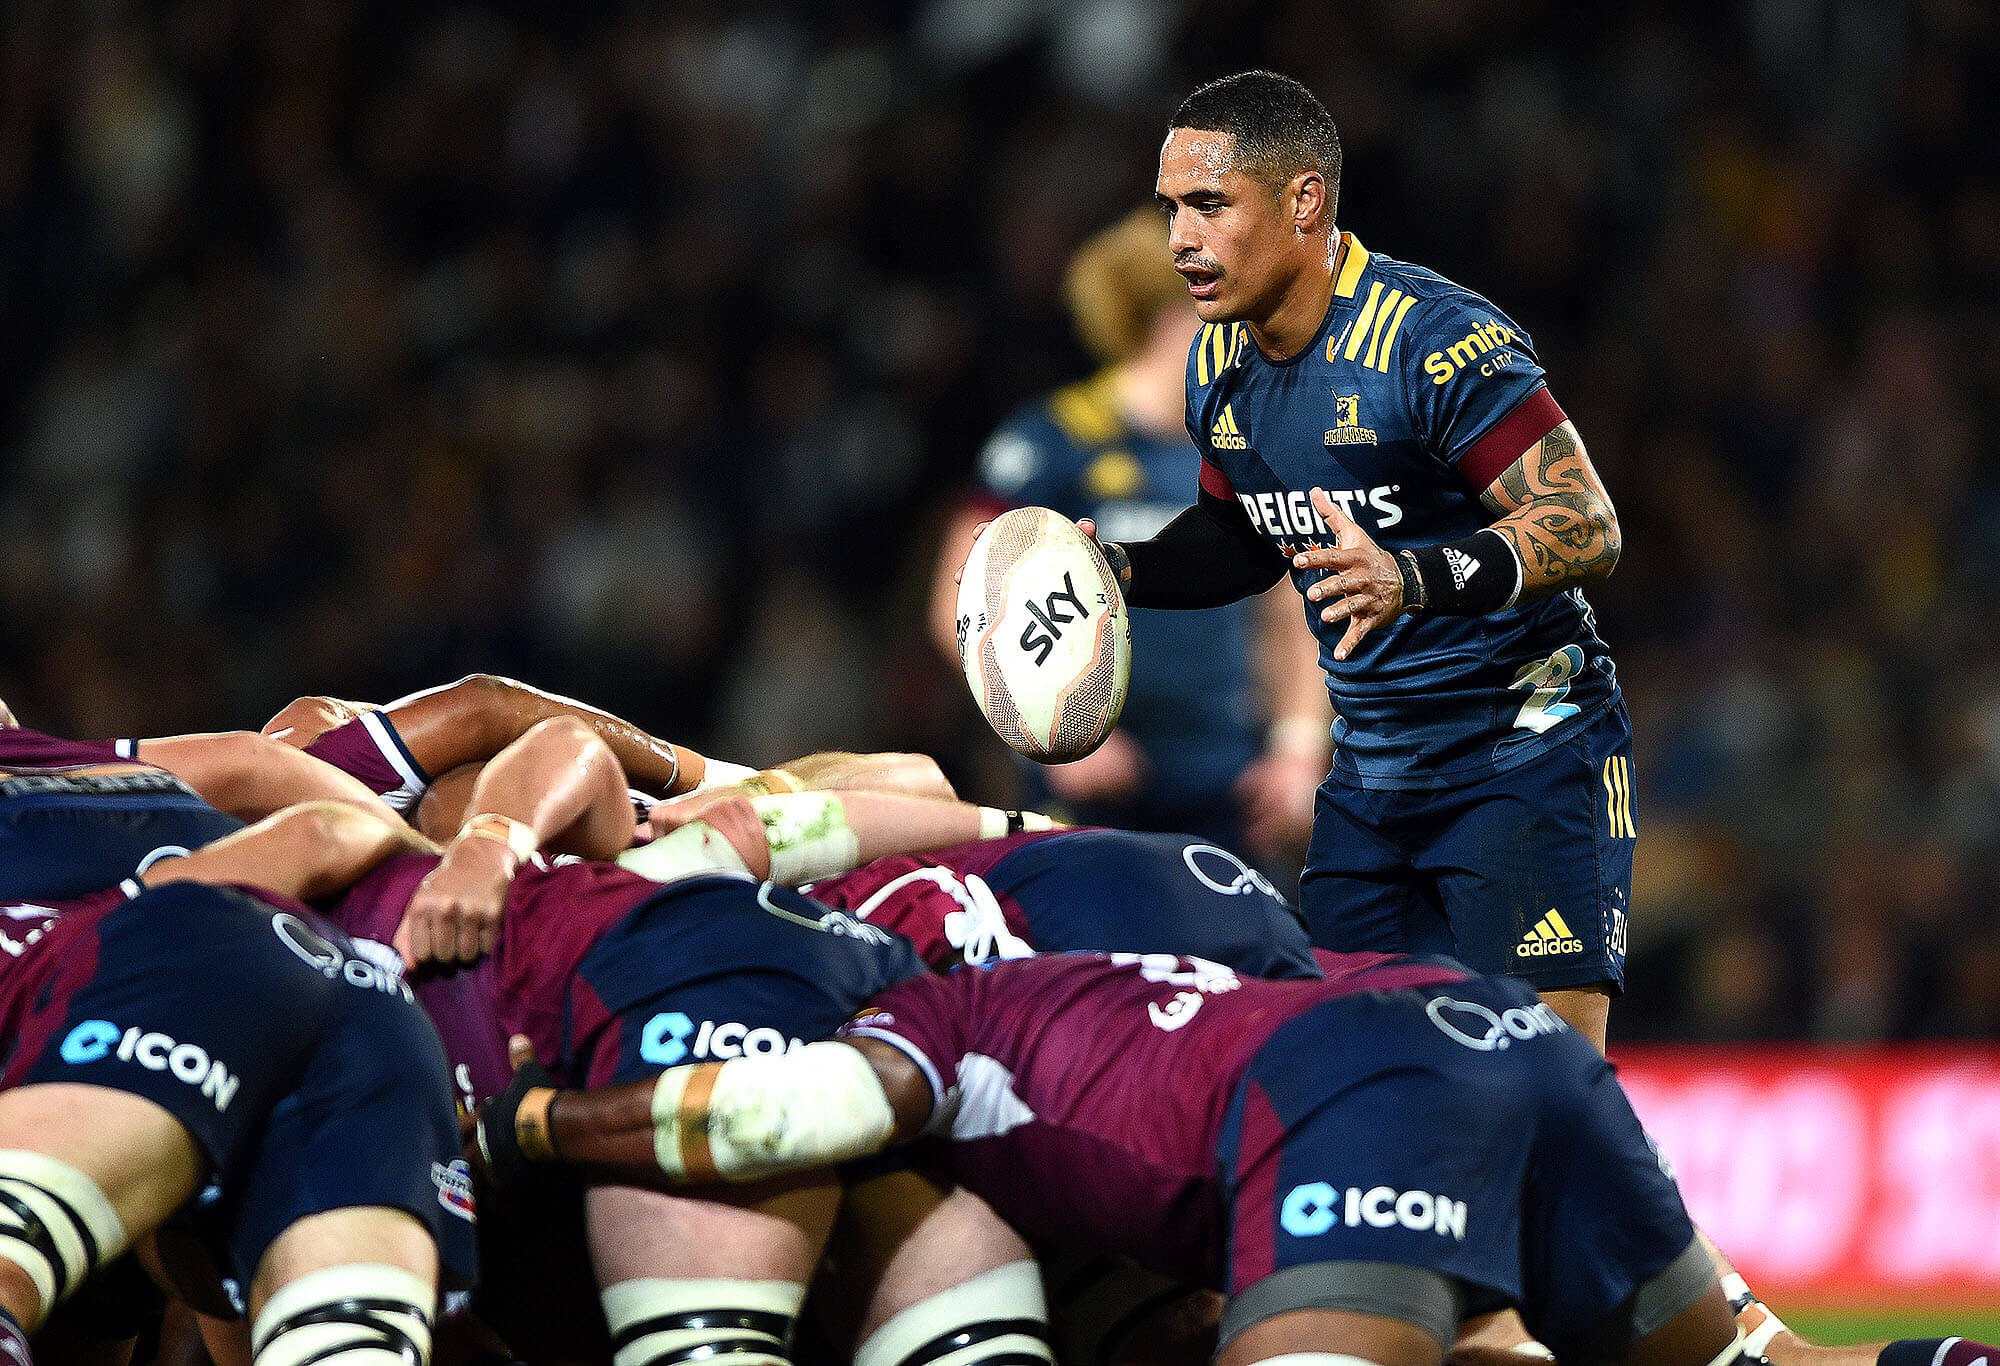 The Highlanders' Aaron Smith prepares to feed a scrum